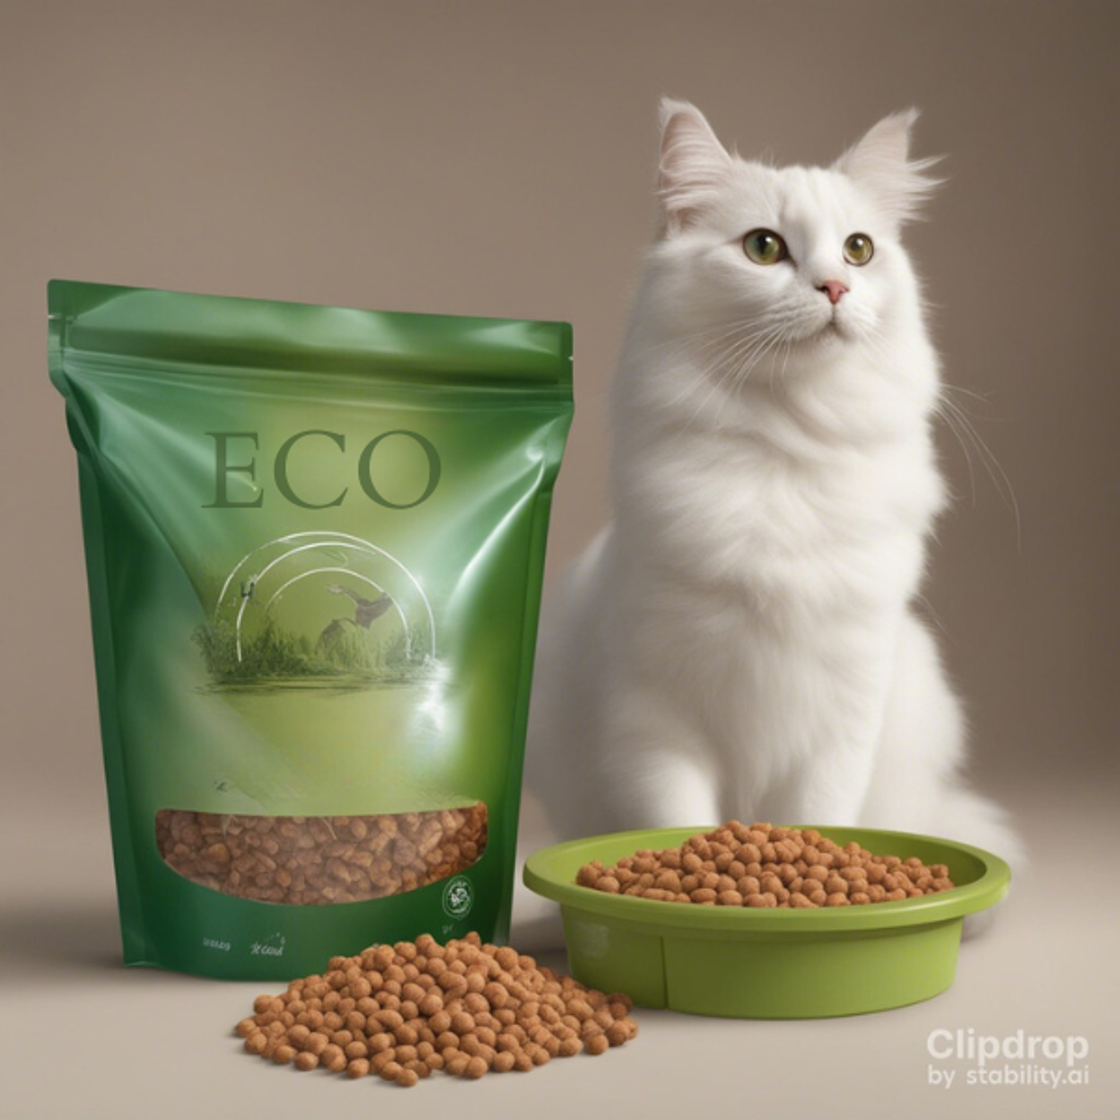 BIOPET: transforming pet food for a greener world